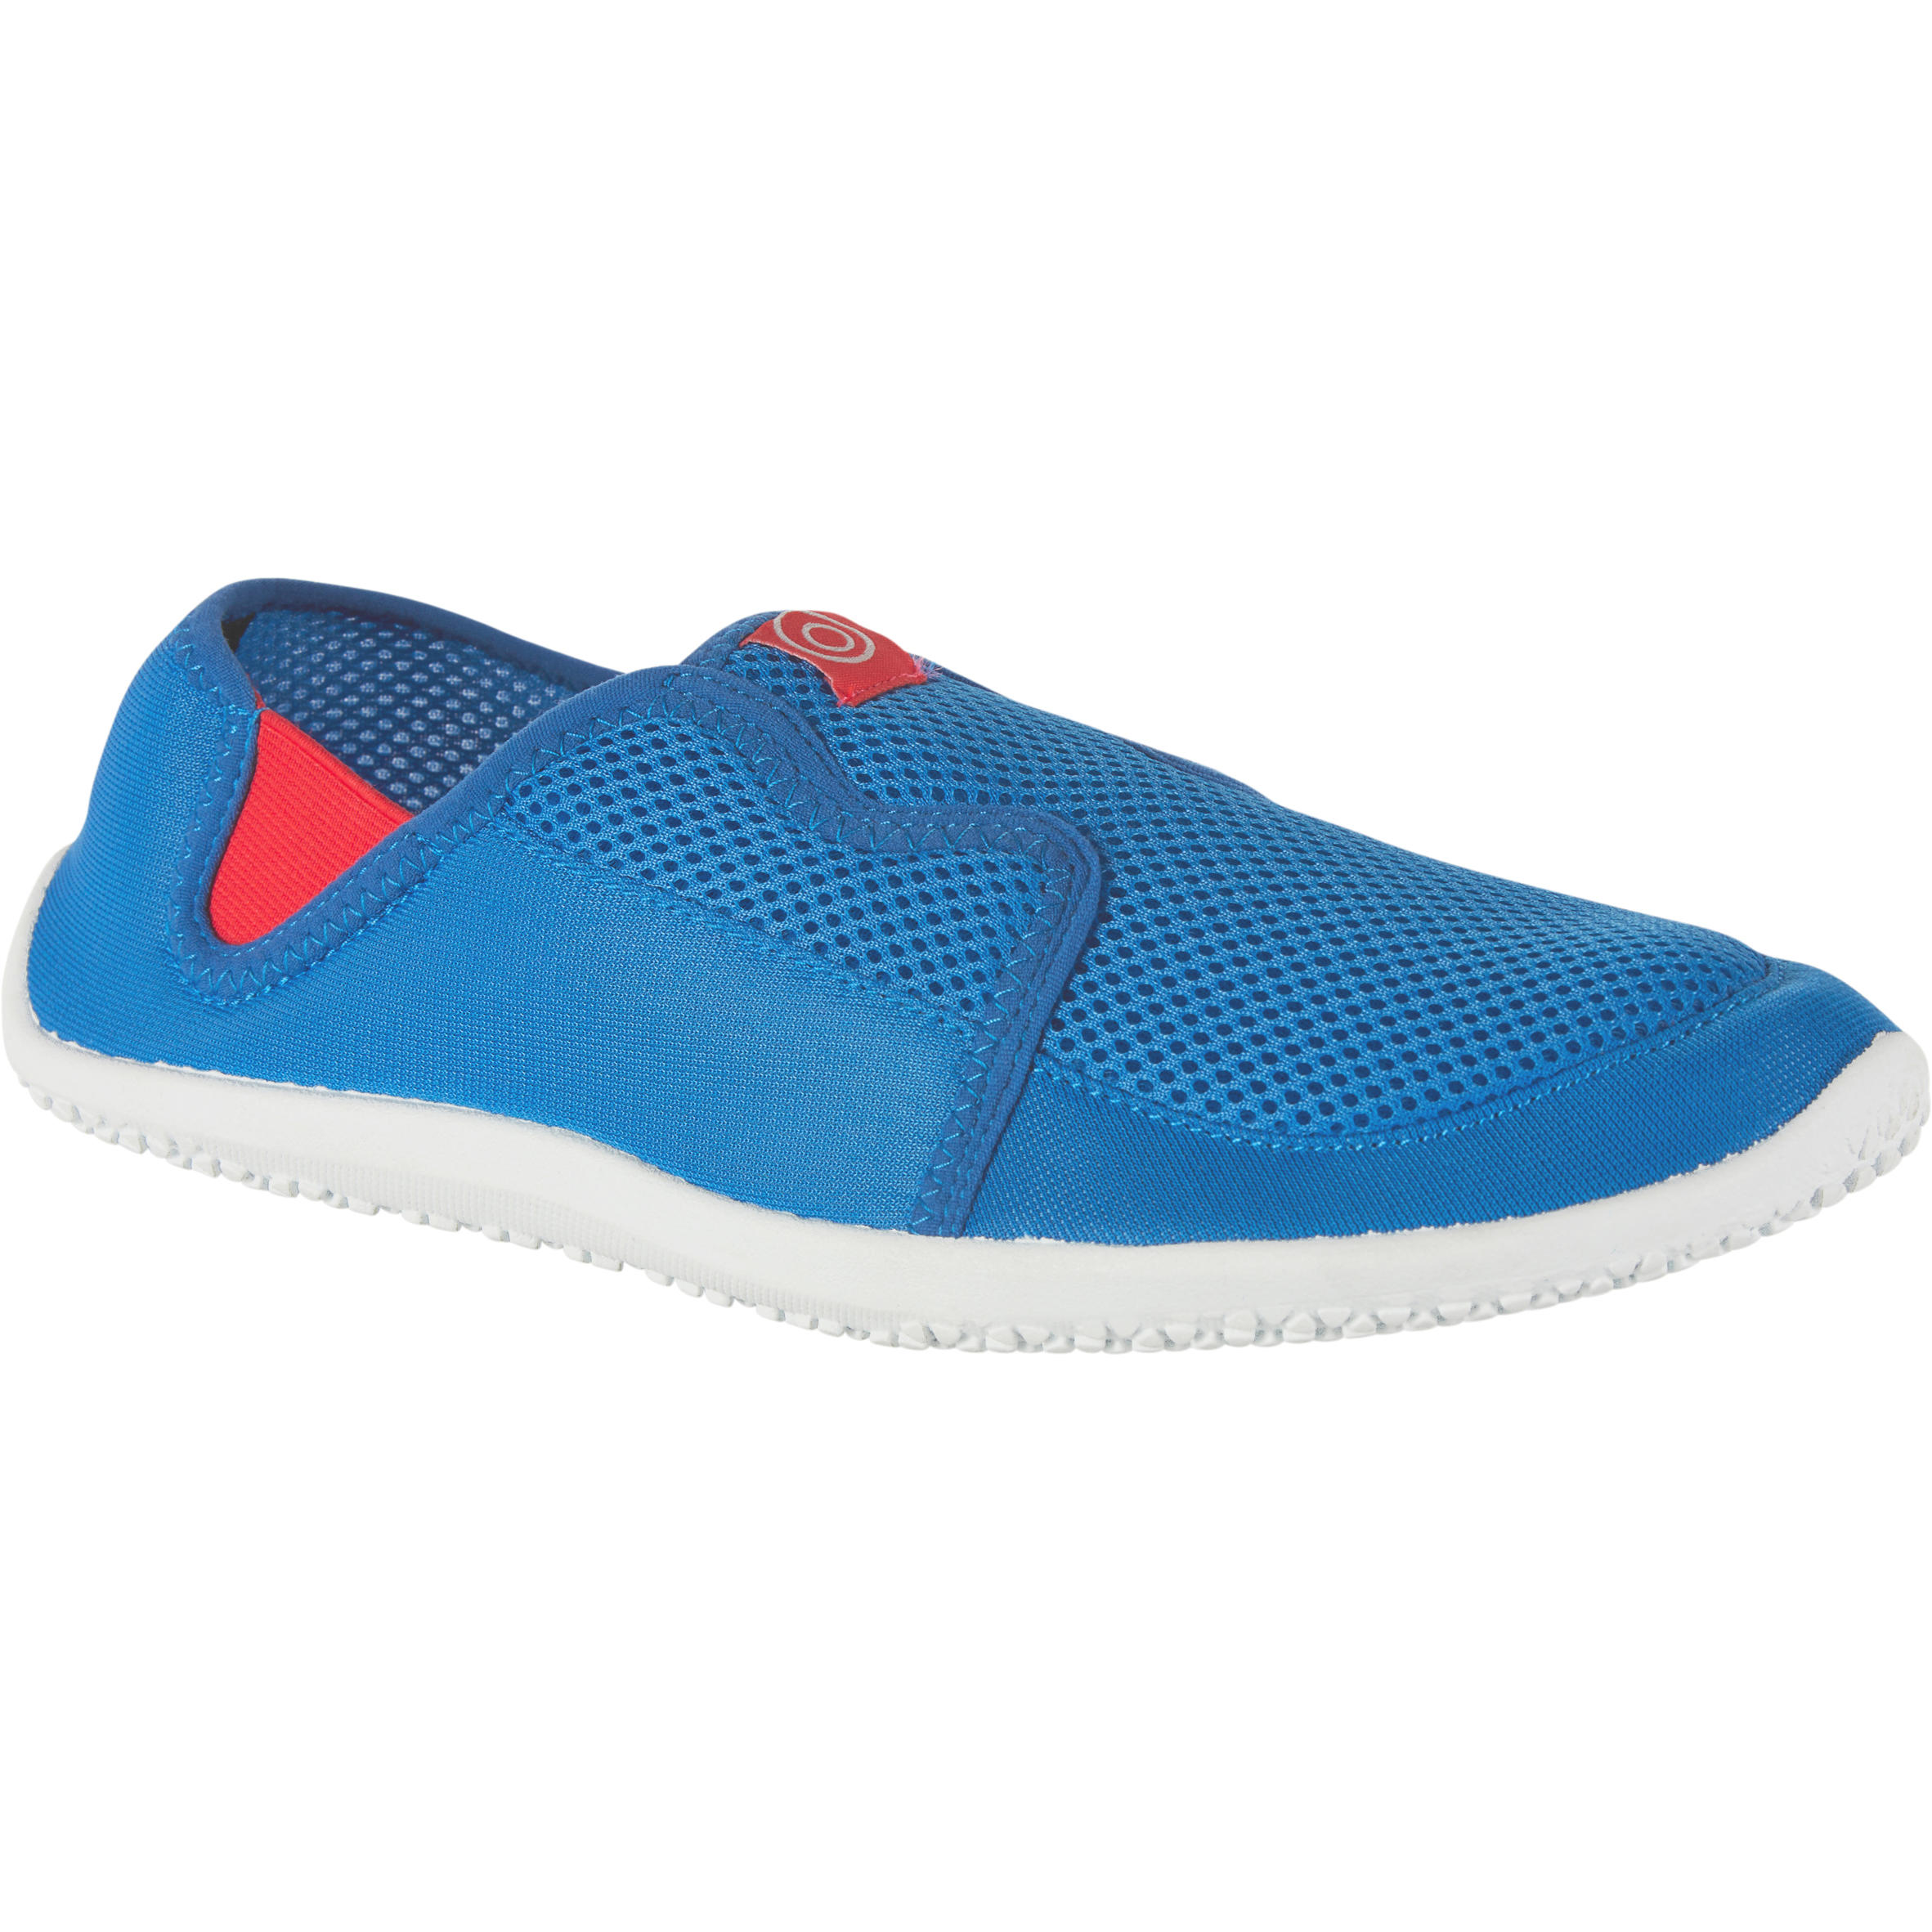 SUBEA Adult Aquashoes SNK 120 Blue Red